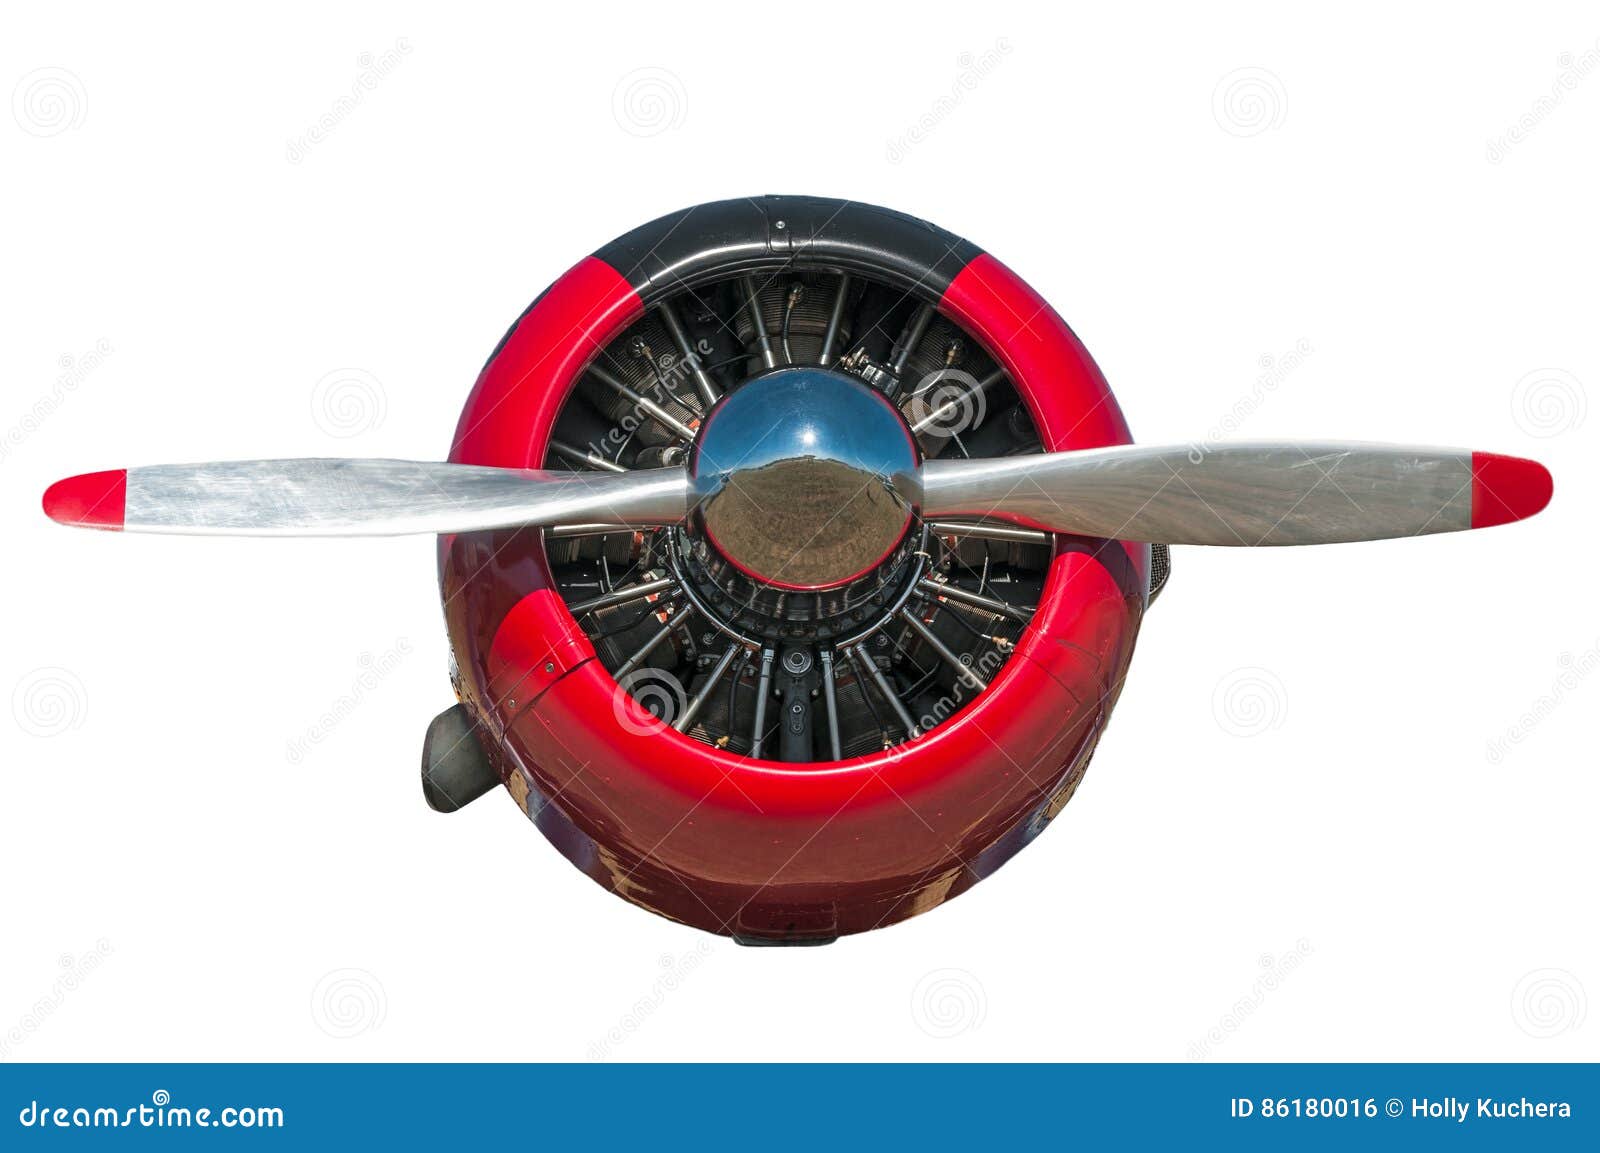 red and black at-6 texan engine and propeller